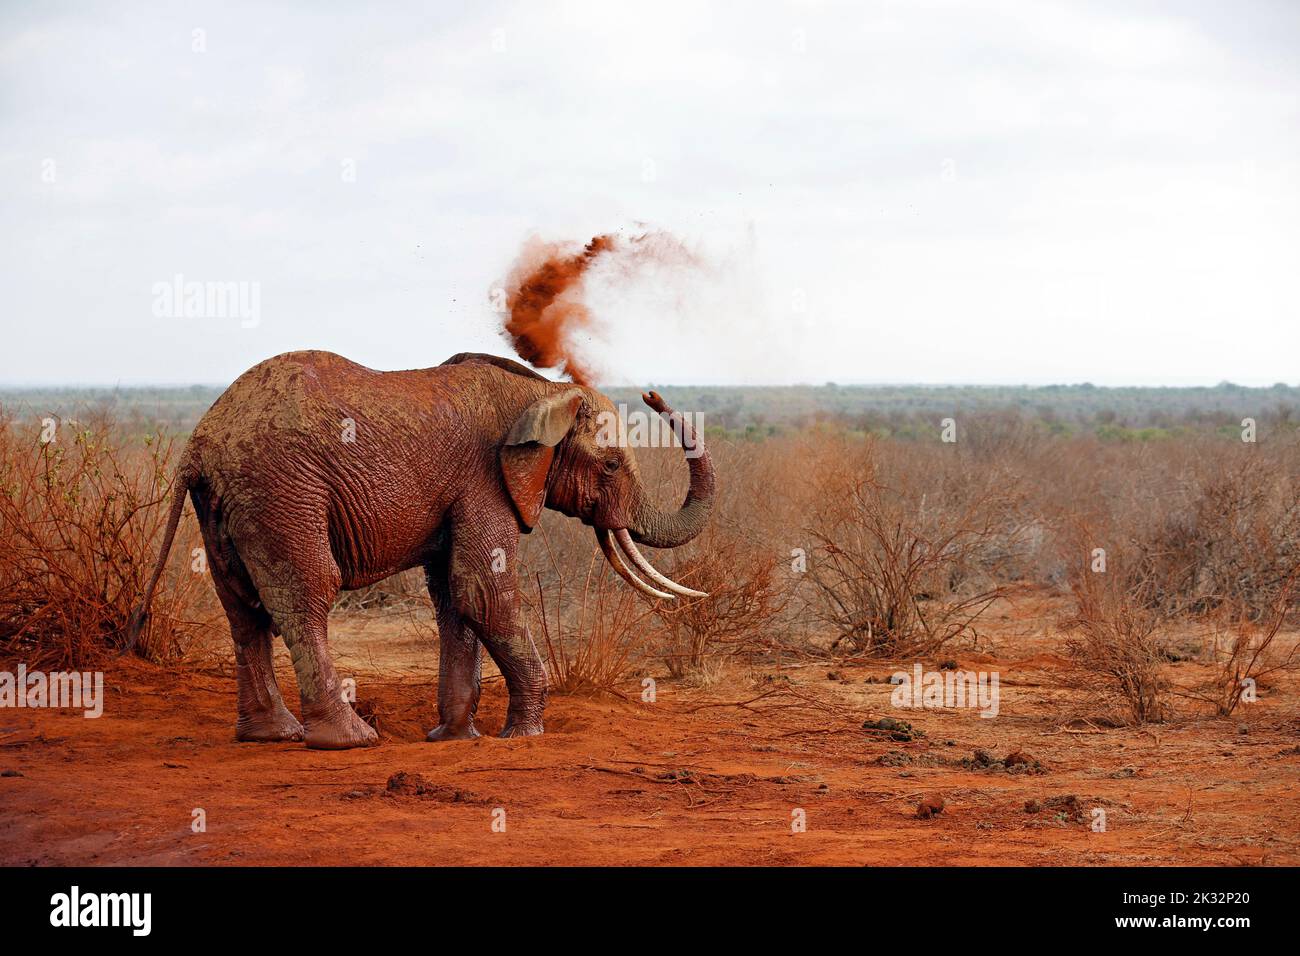 Elephant Showering itself with Red Dust. (Third image in a series of five). Tsavo East, Kenya Stock Photo